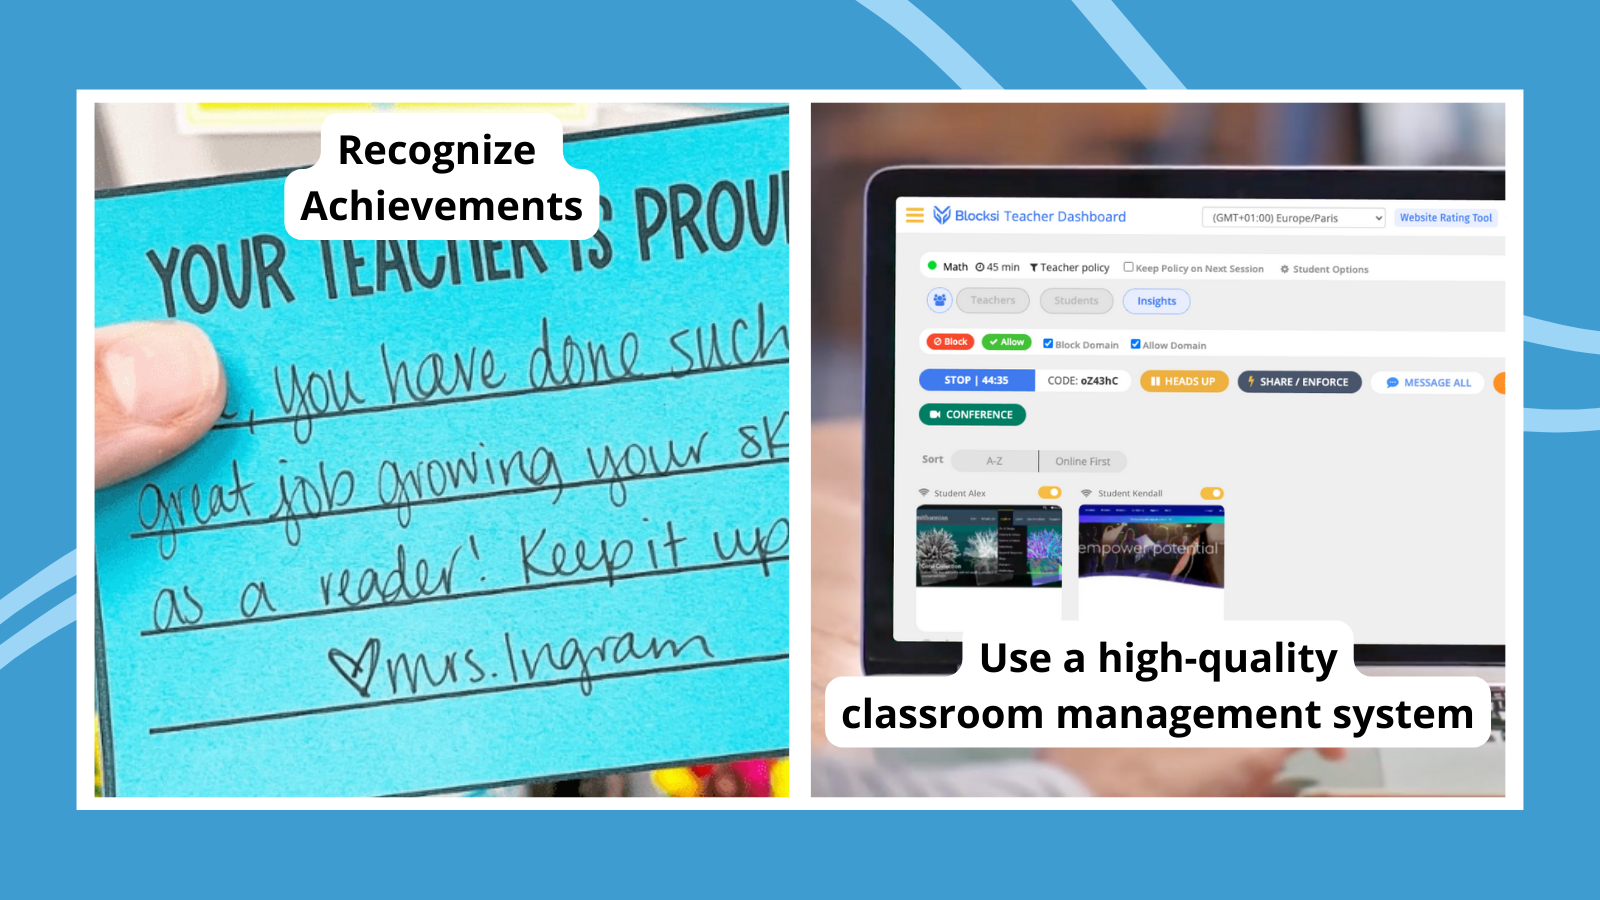 How to Set Up Classroom Screen Monitoring in Your School